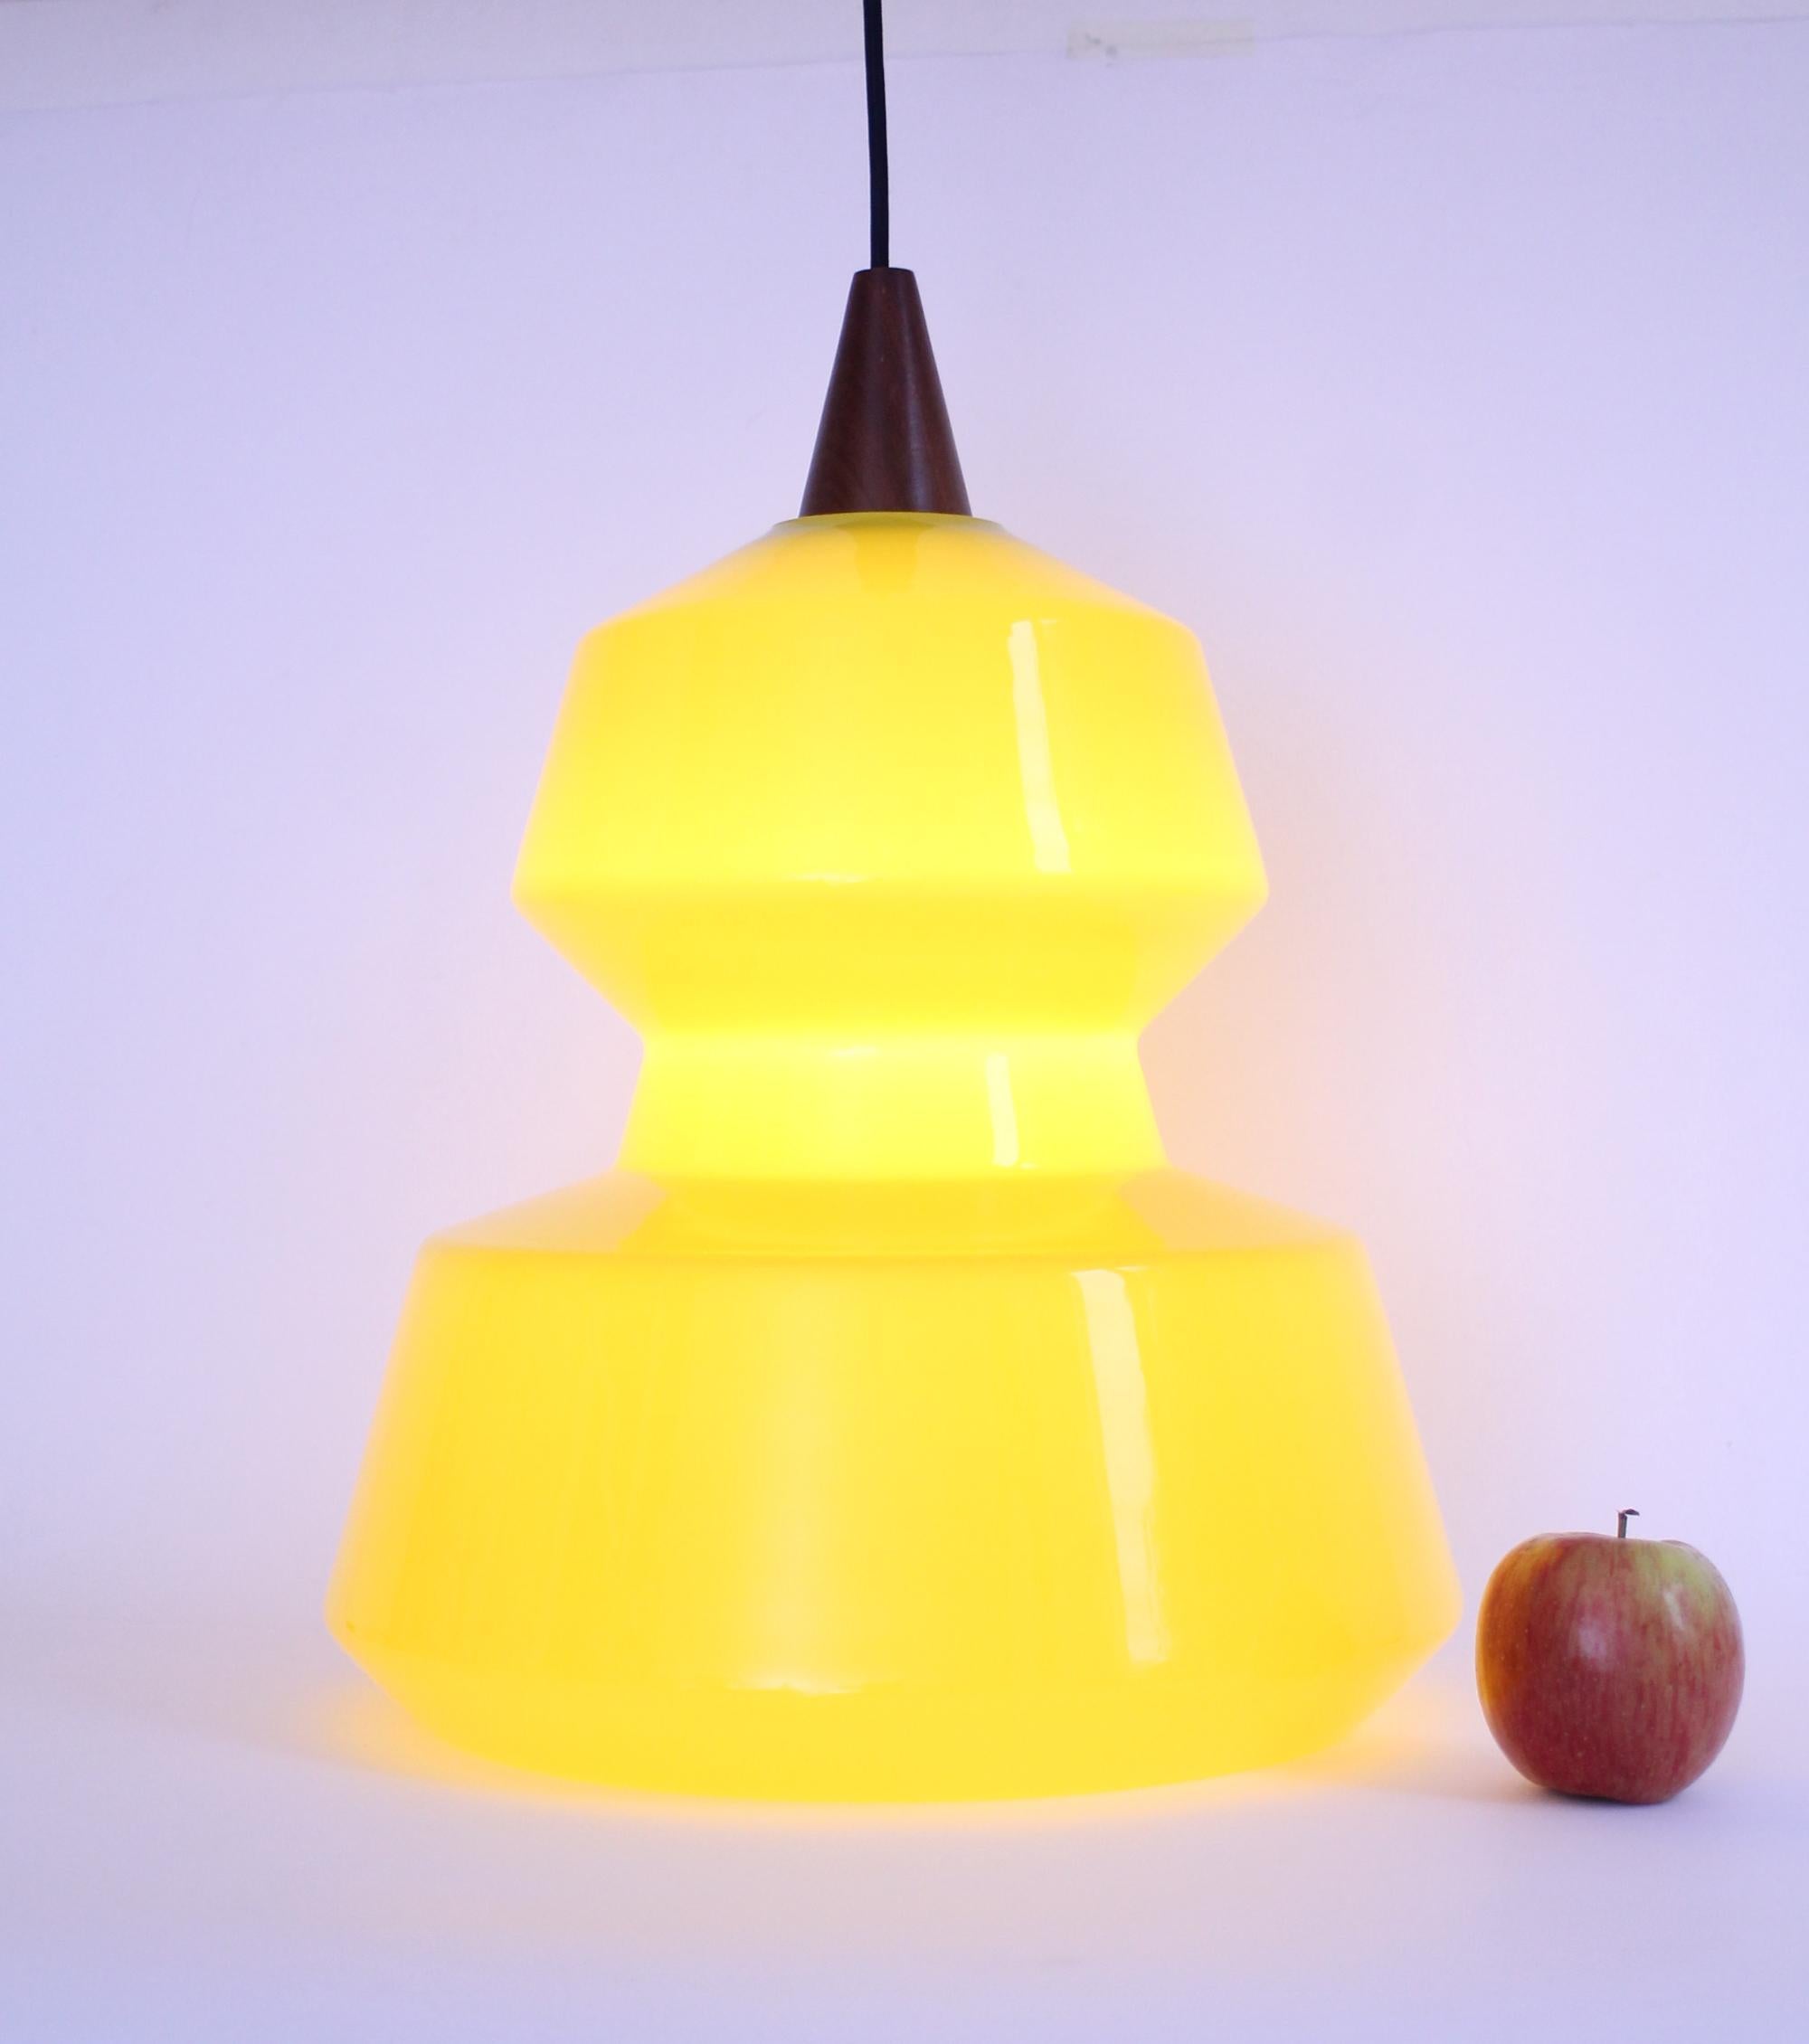 1950s ceiling/pendant Murano glass lamp (inner opaline + outer yellow) for VISTOSI vetreria

Designed by Guglielmo Vistosi
Manufacturer: Vistosi Vetreria (Murano - Italy)
Dimensions: 47cm height x Ø 37cm (glass piece with external wood canopy glass